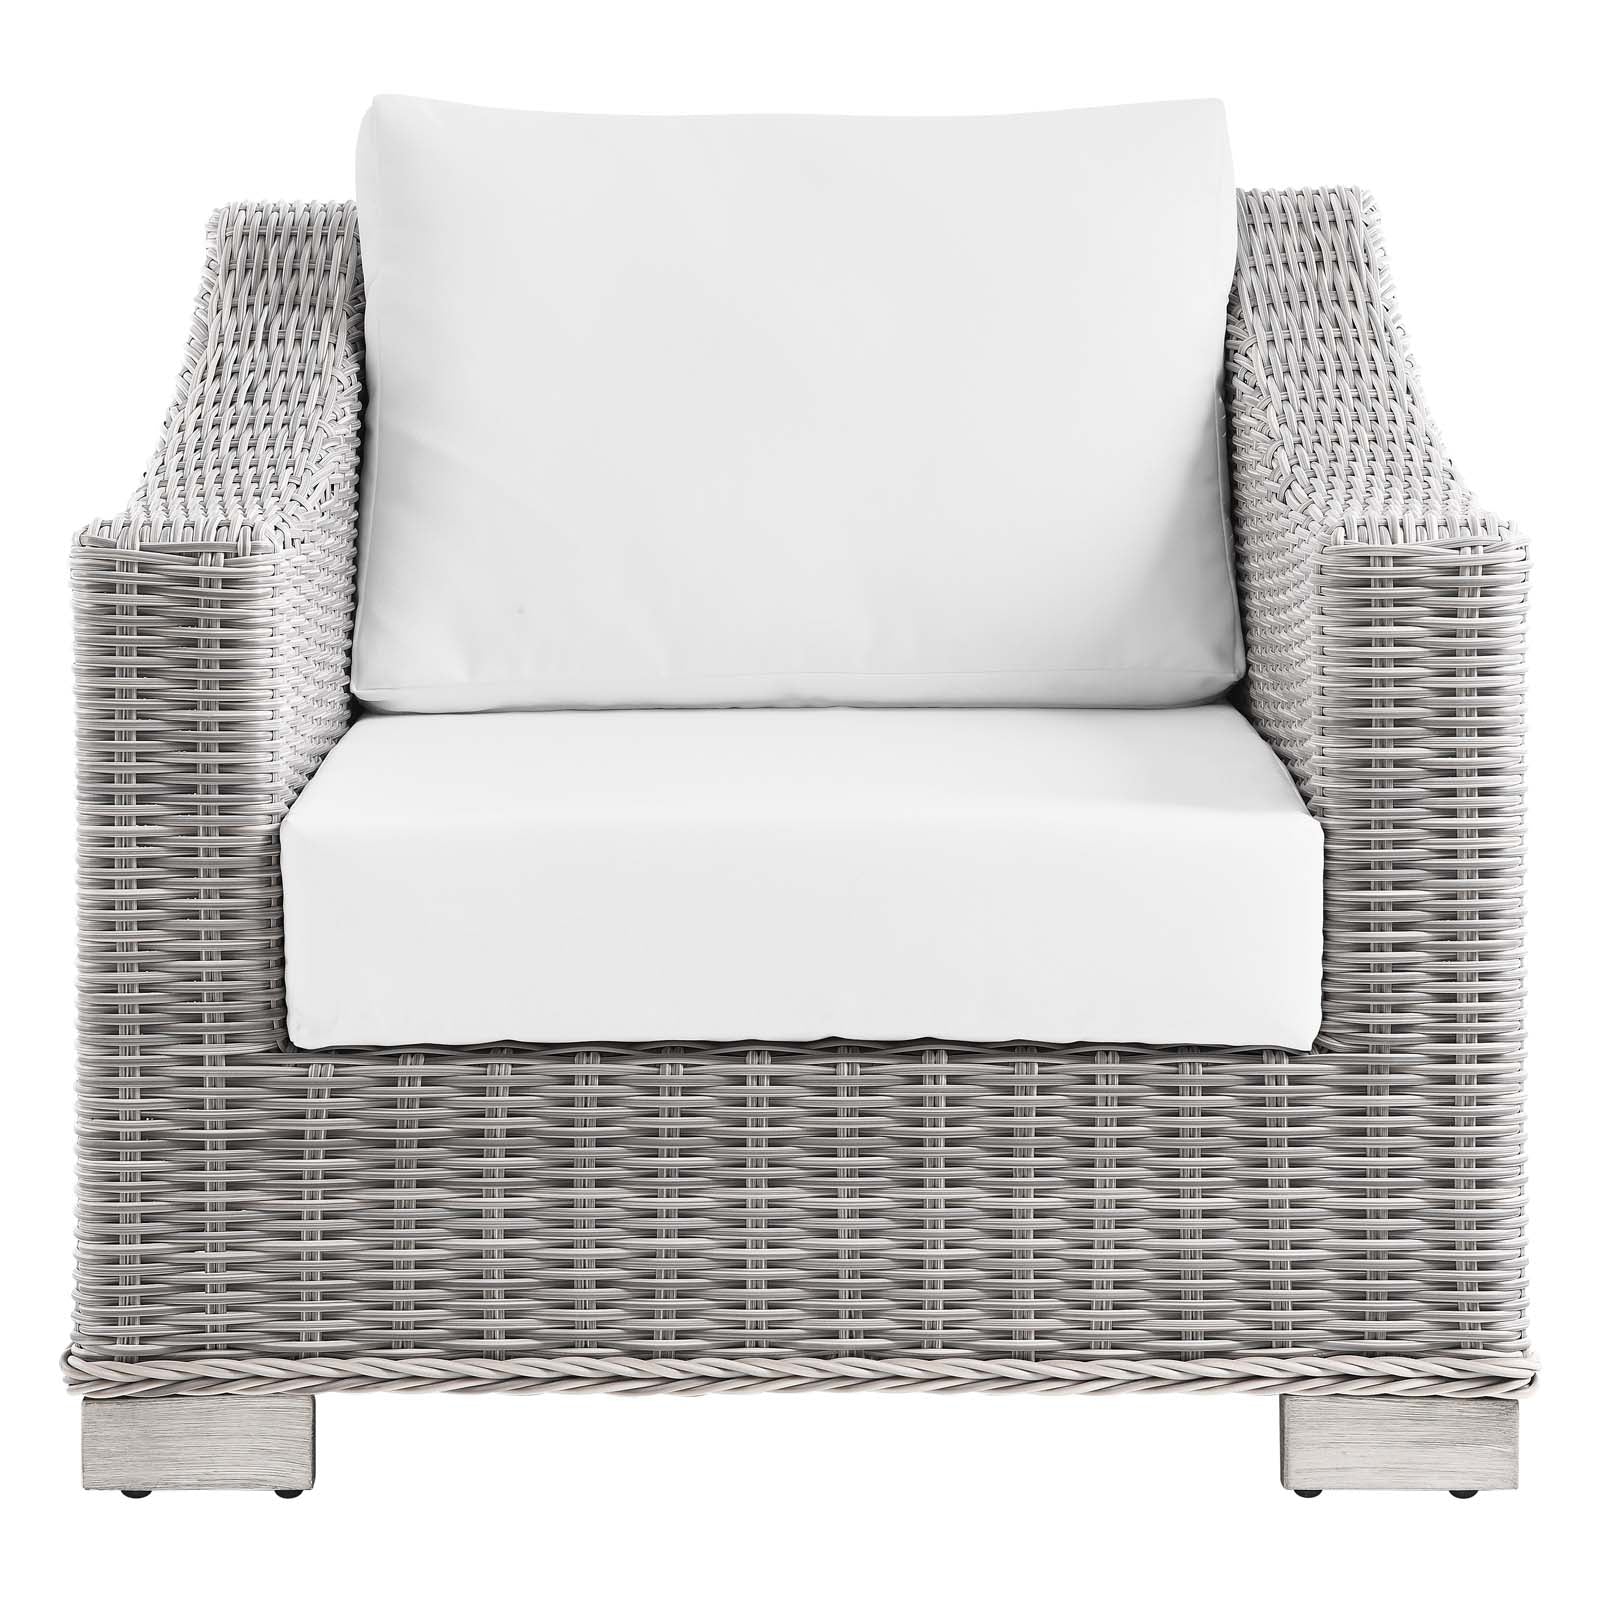 Conway Outdoor Patio Wicker Rattan Armchair - East Shore Modern Home Furnishings